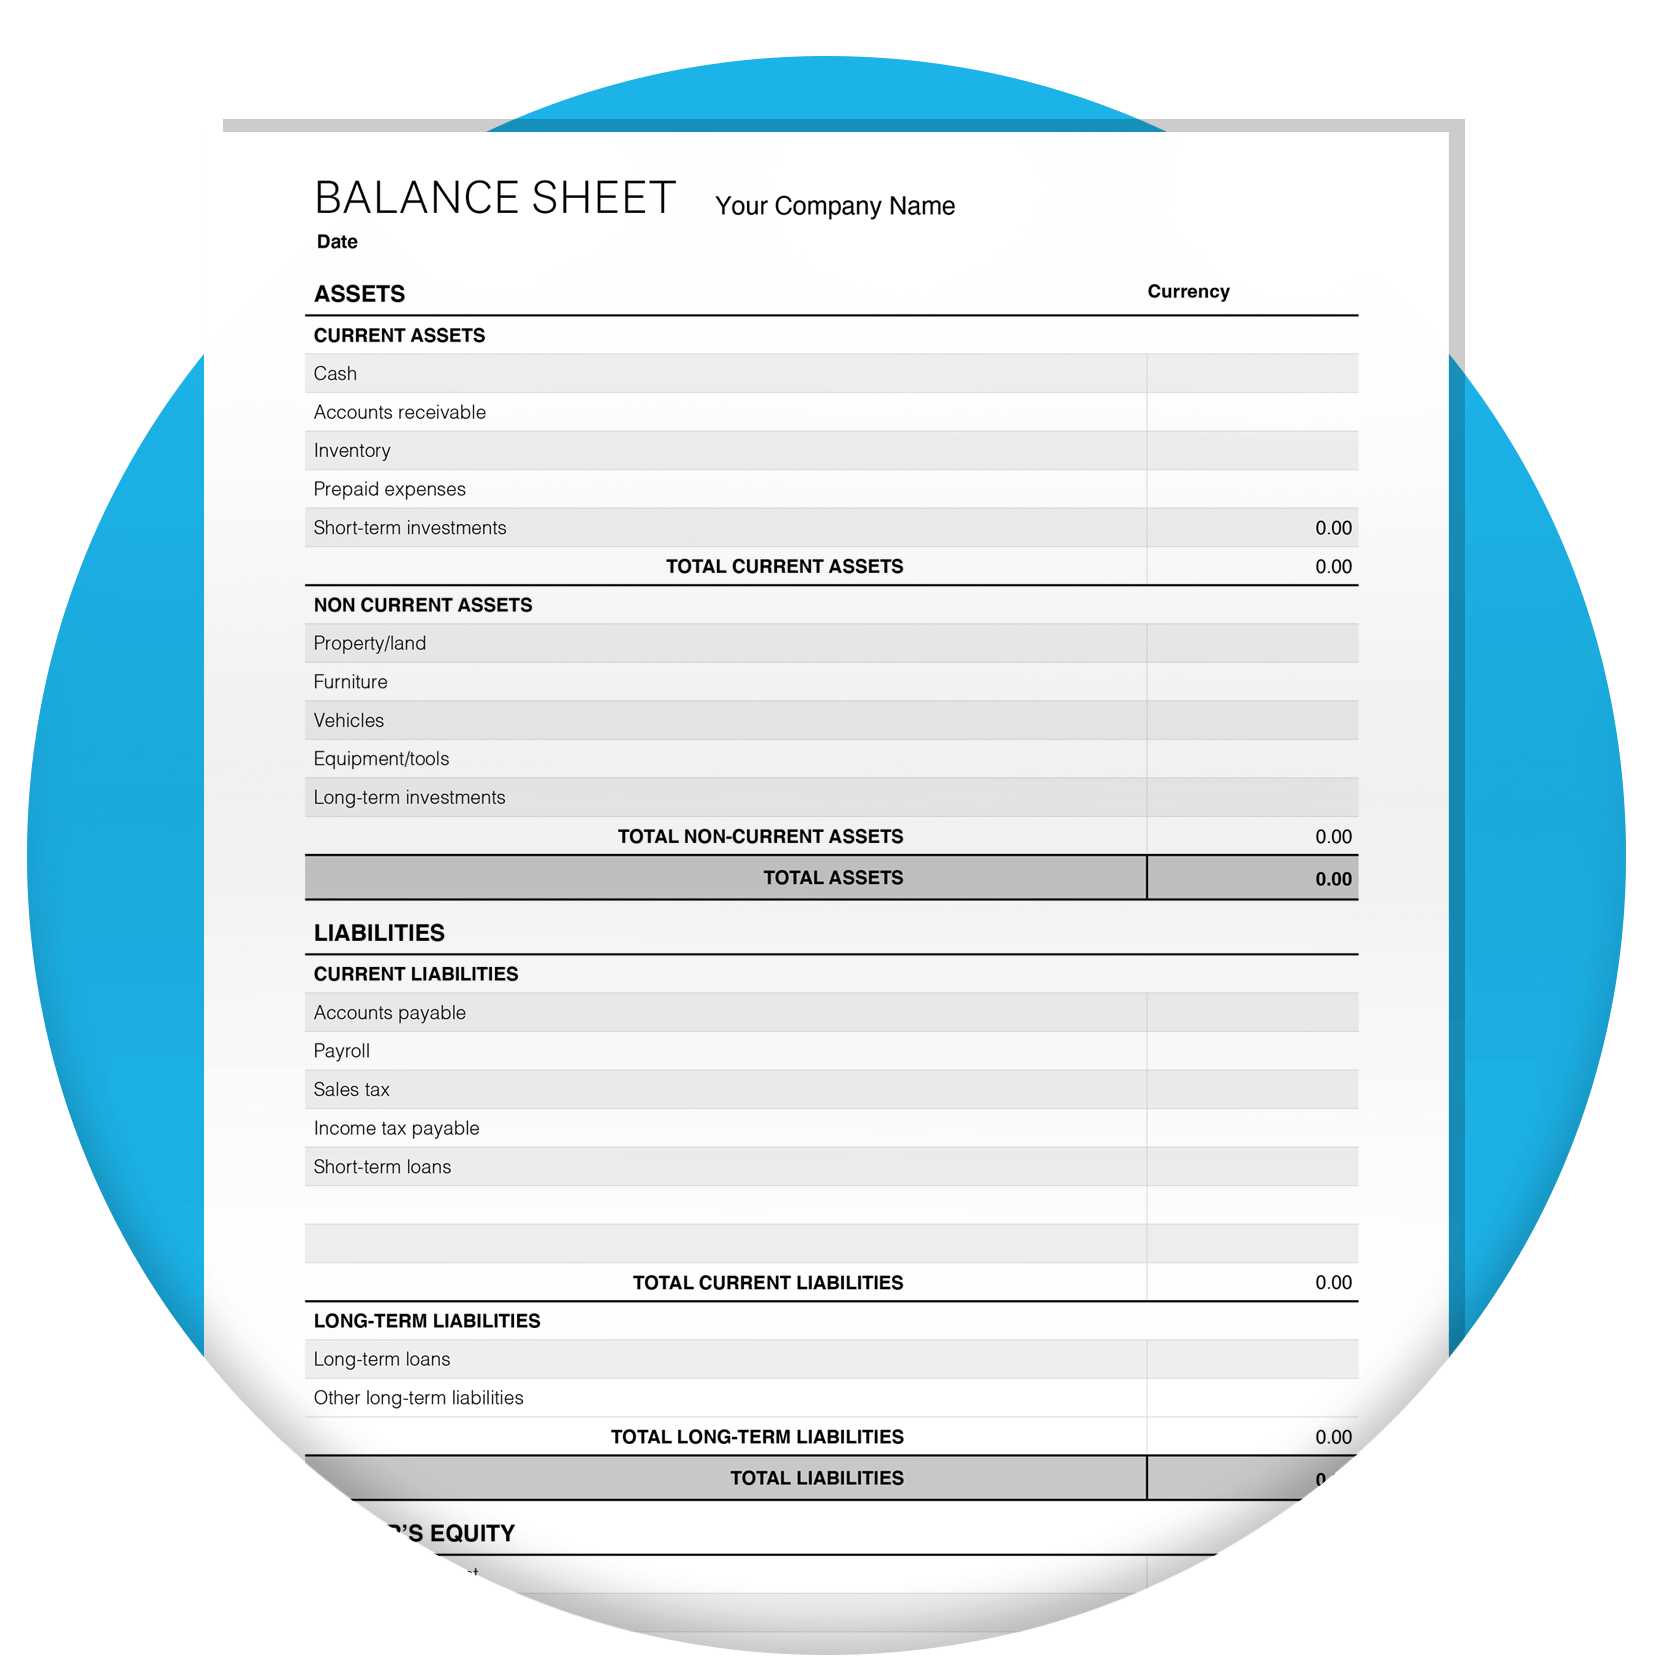 Balance sheet template with blank fields for users to fill out.